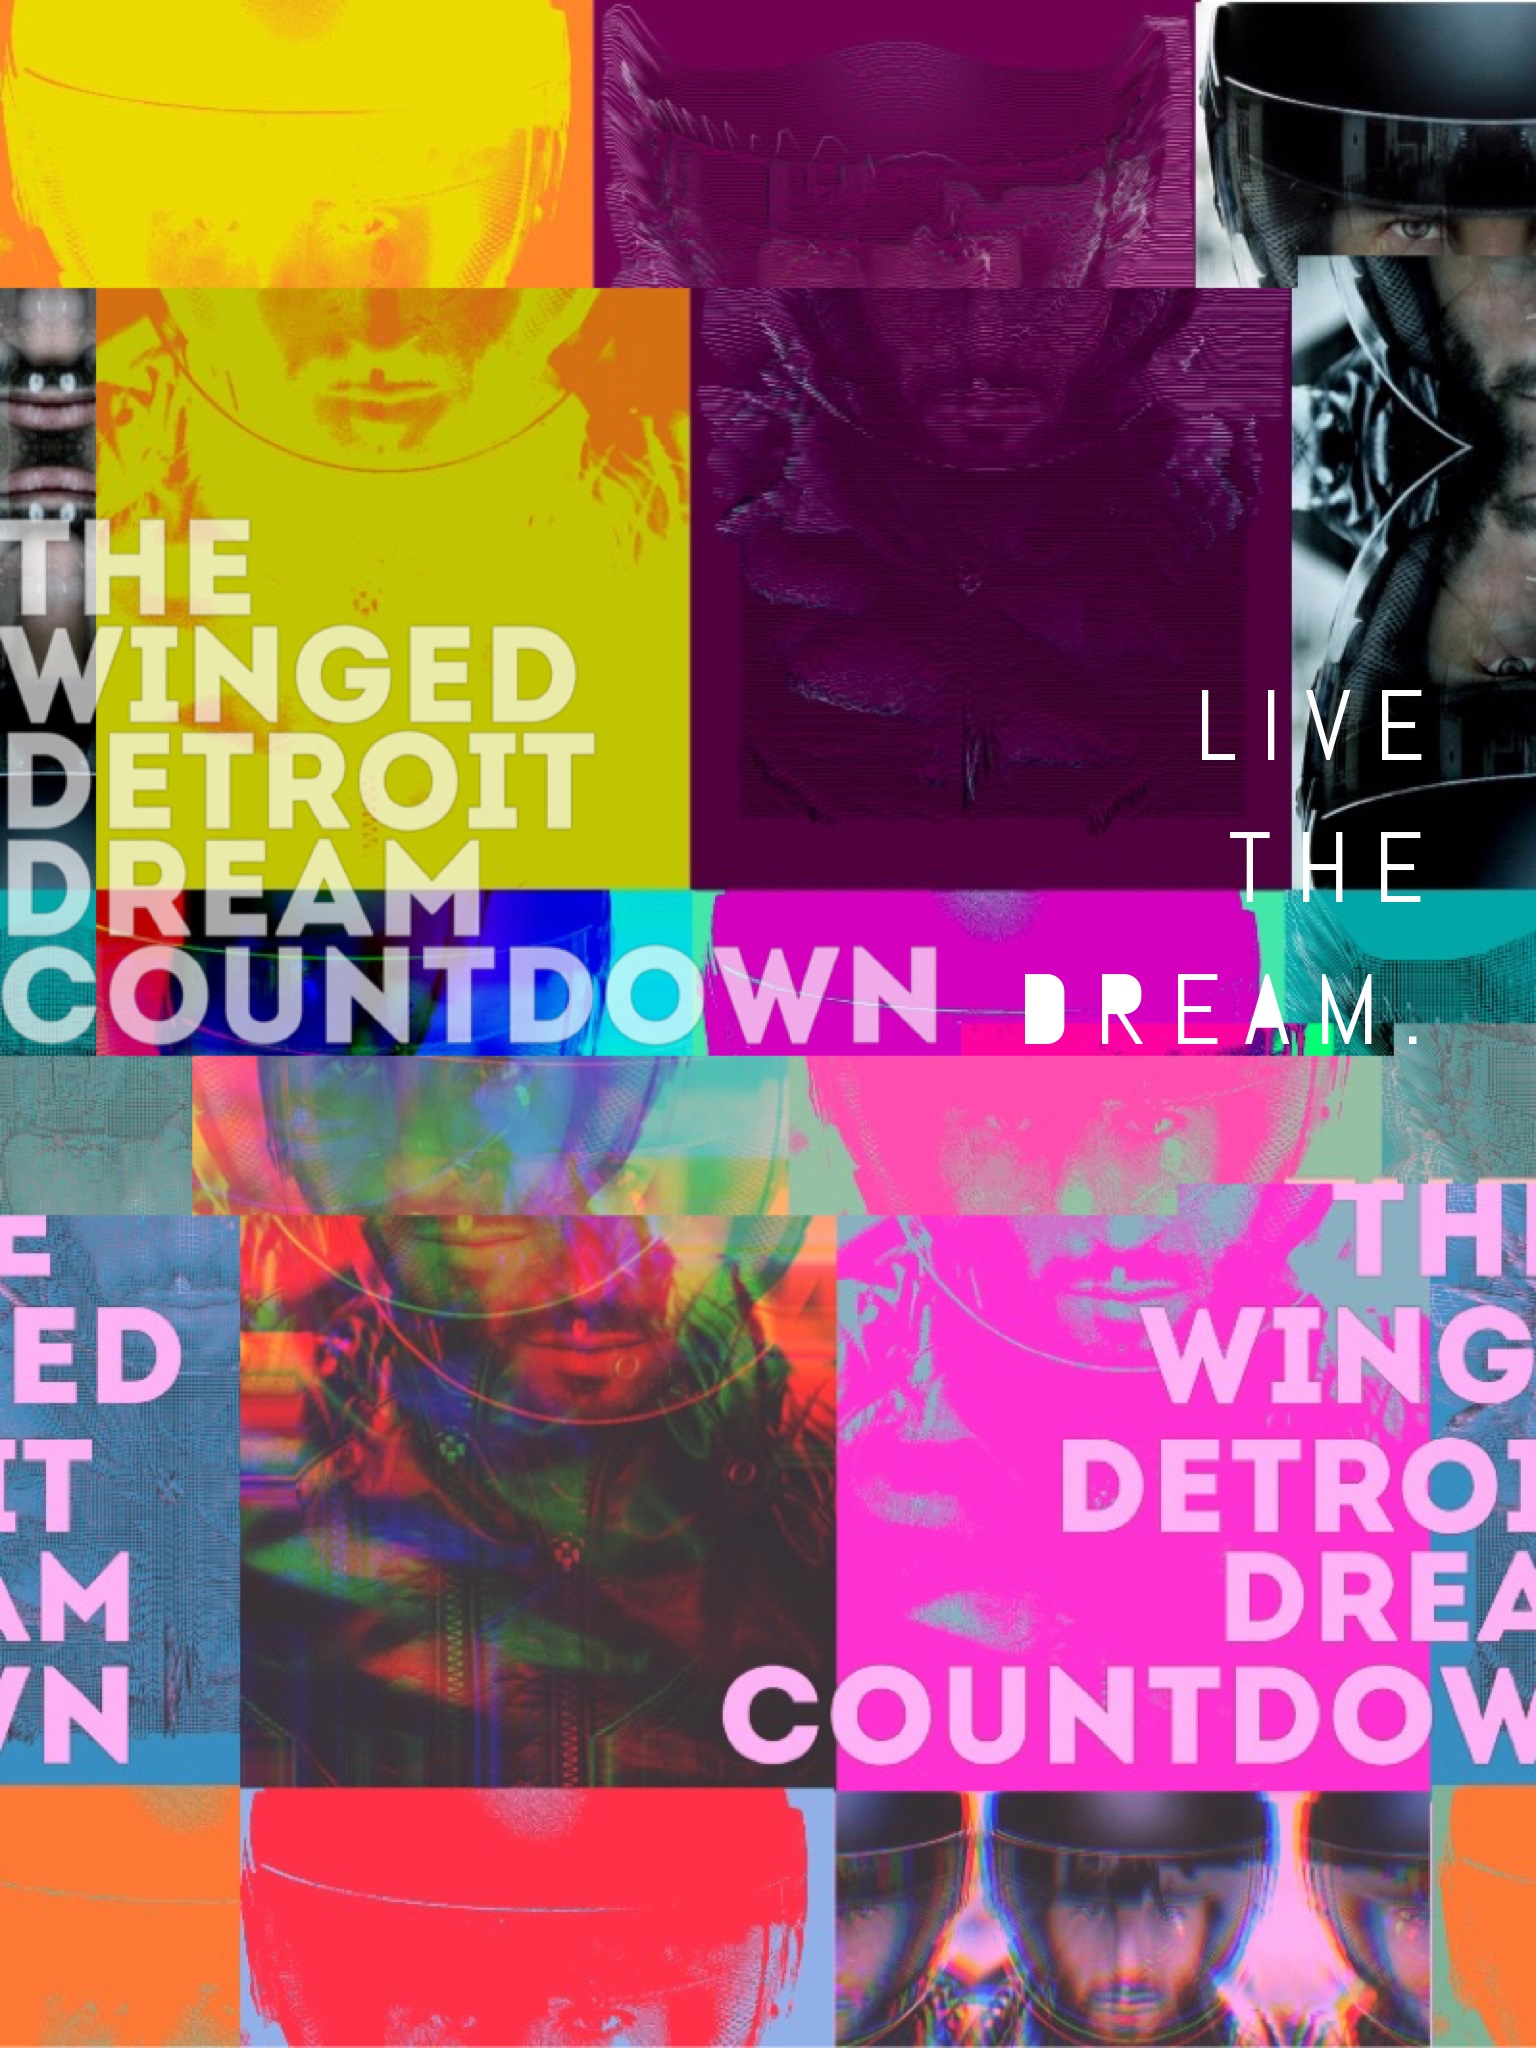 Episode 55 - Winged Detroit Dream Countdown feat. Laura Luttrell